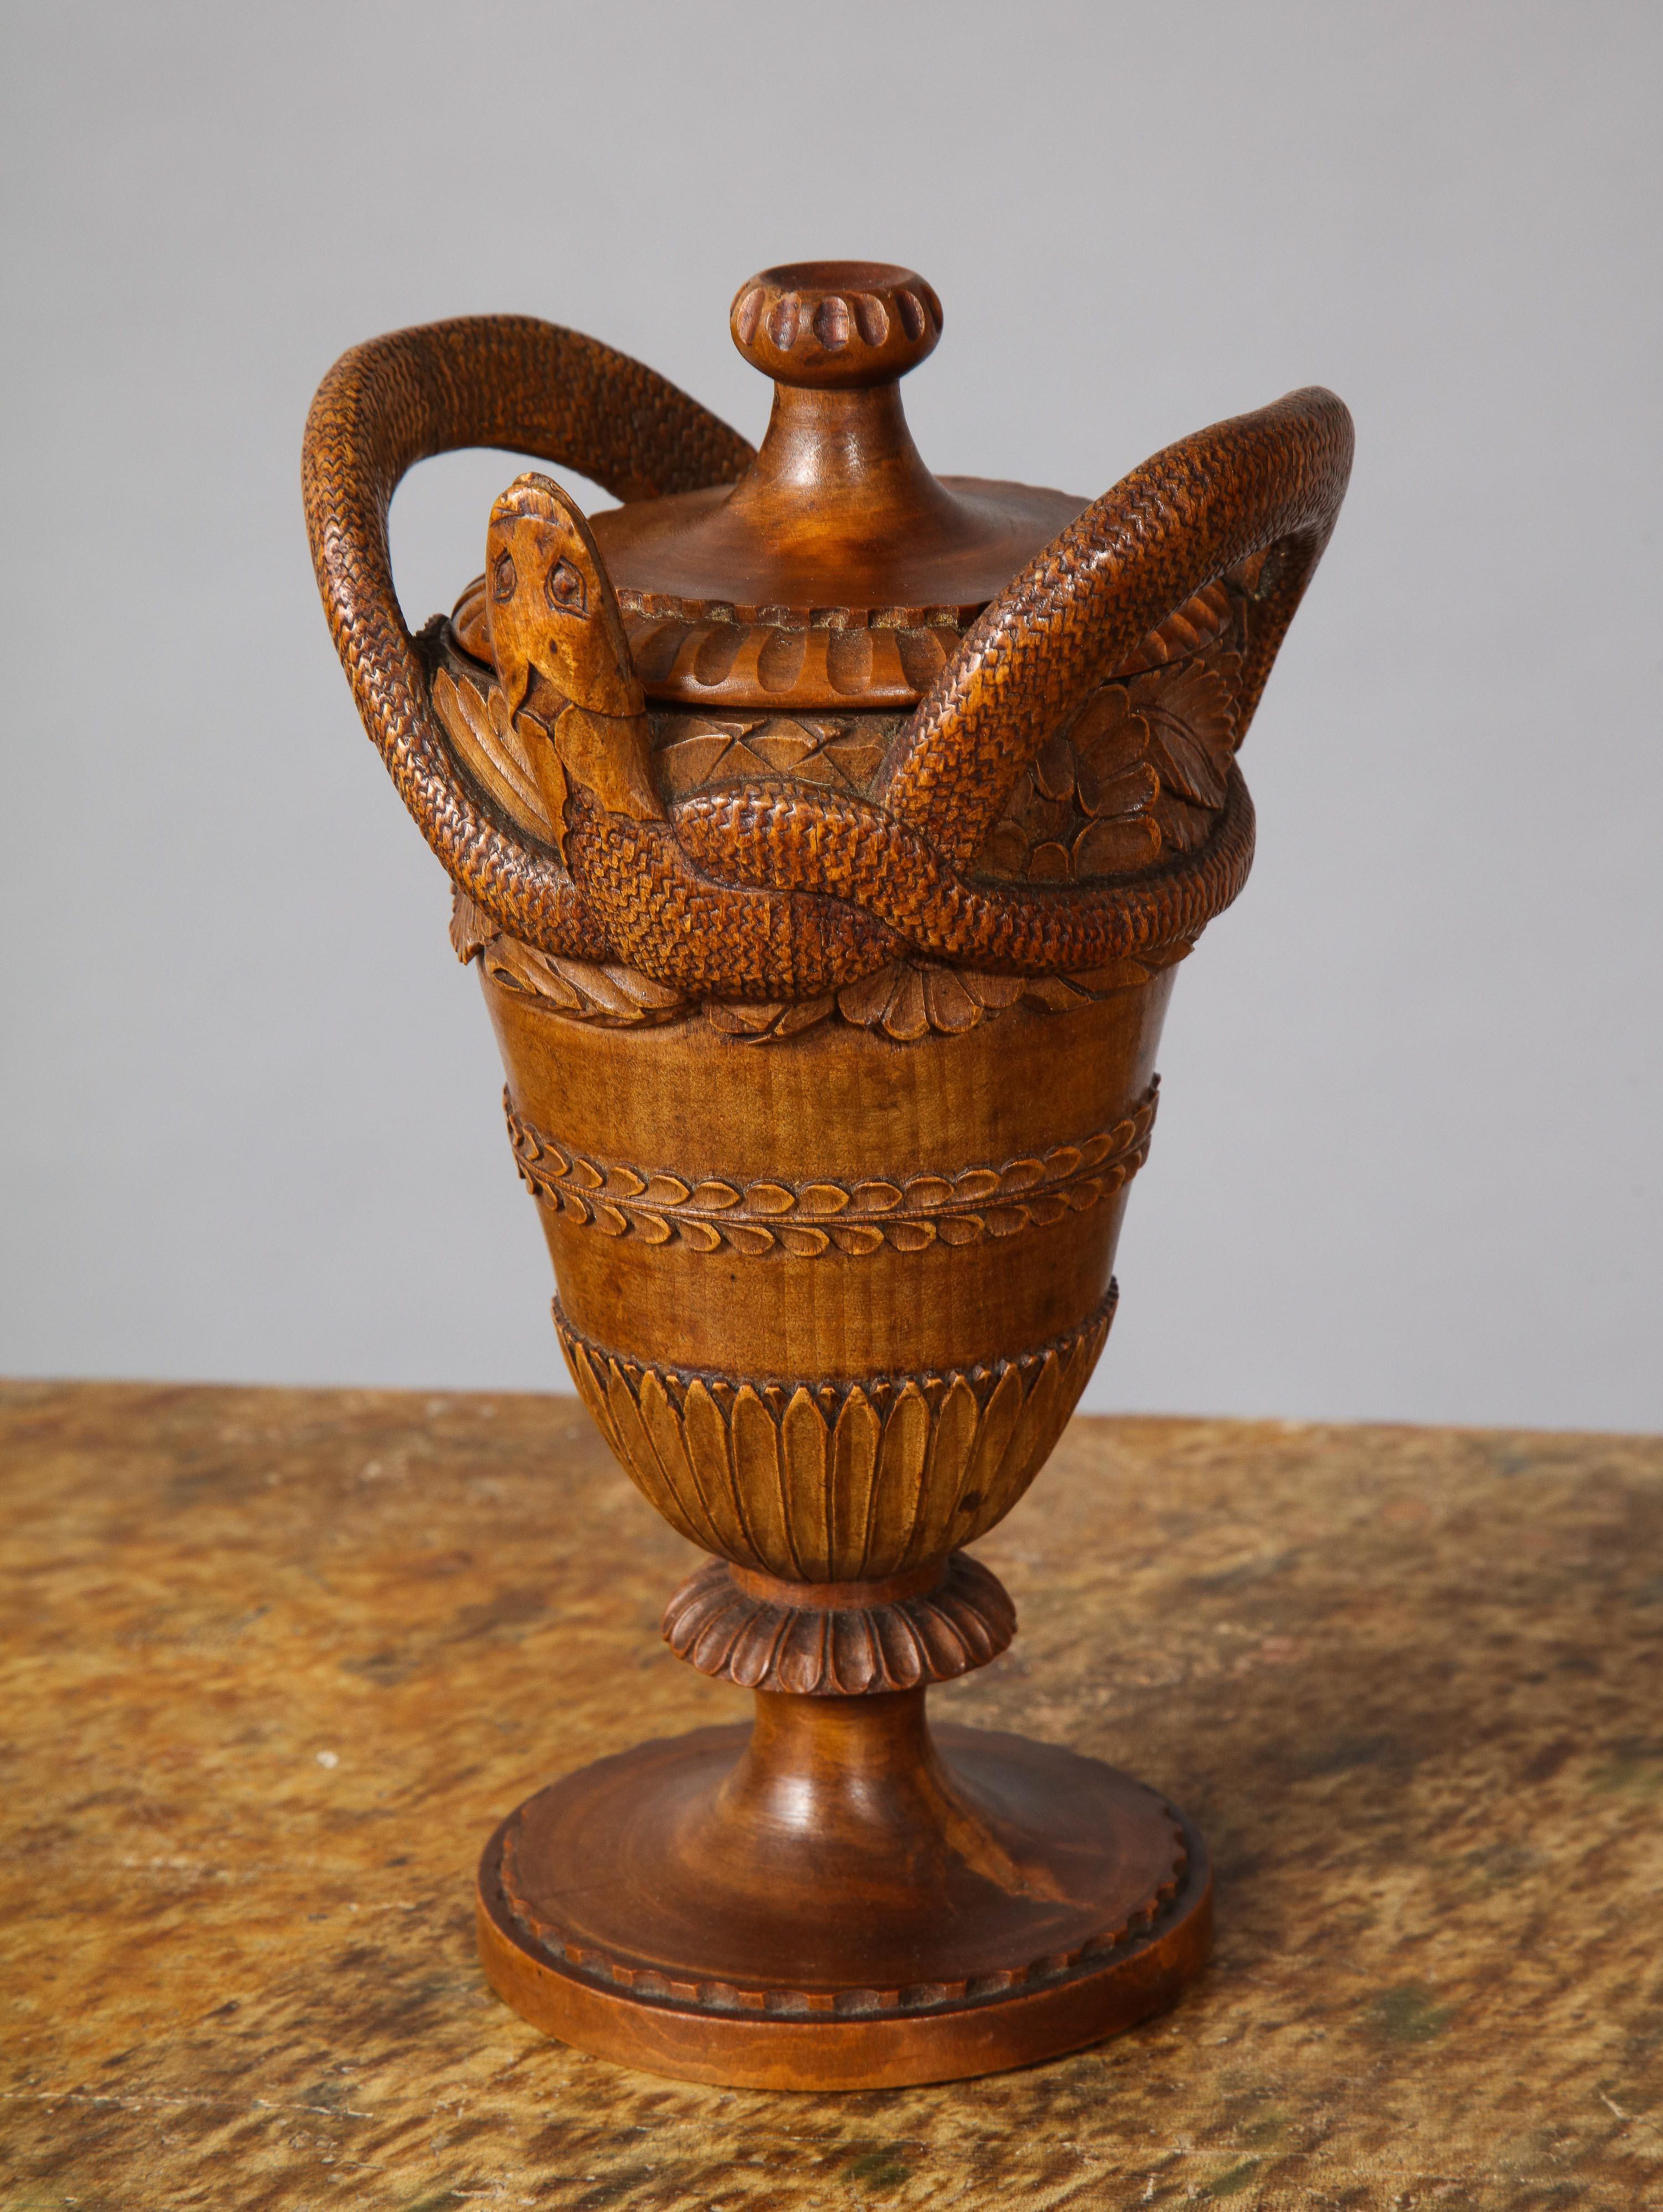 Very fine early 19th century carved wood neoclassical urn with gadrooned finial and entwined snake handles, tapered base with long leaf carving and standing on turned base, the whole with good rich color and patina.

  